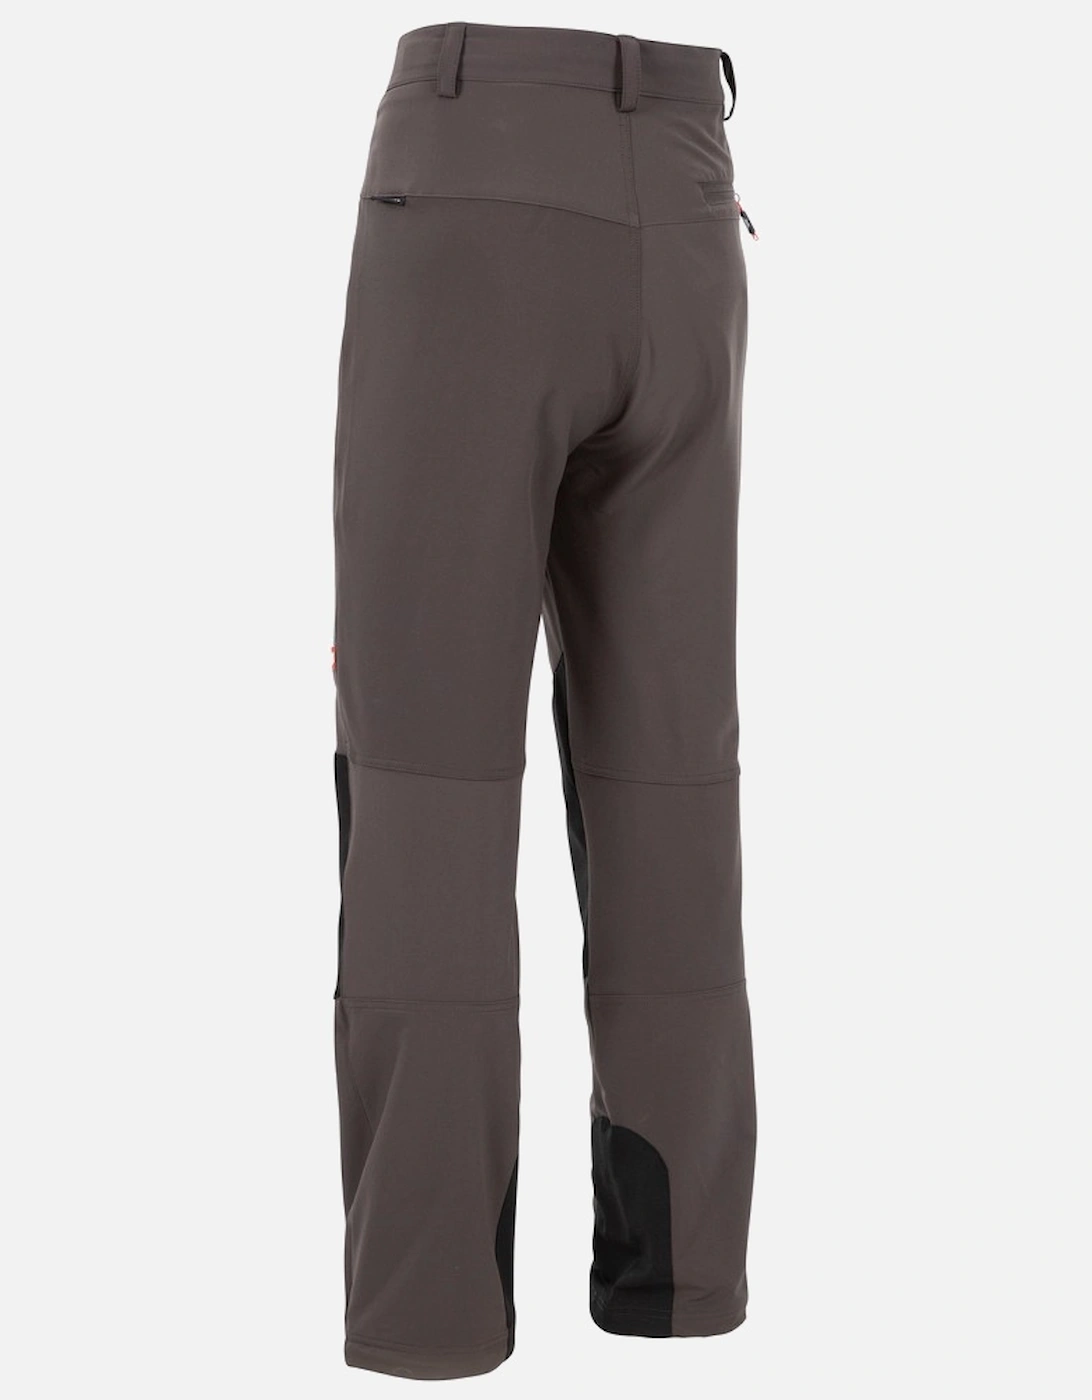 Mens Passcode Hiking Trousers